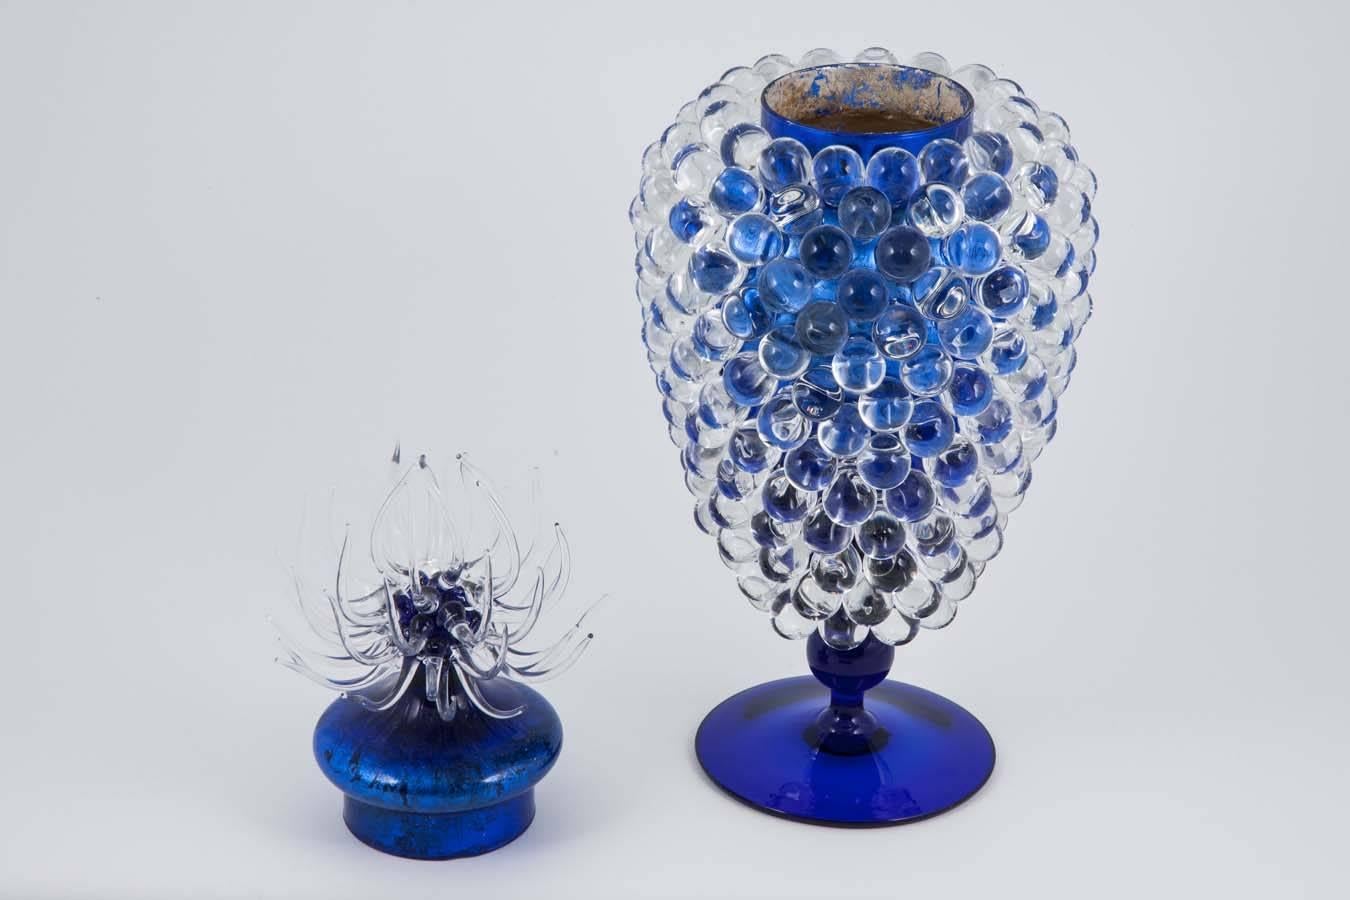 Hand-Crafted Empoli Jar with Thistle, a unique clear & blue glass vessel by James Lethbridge